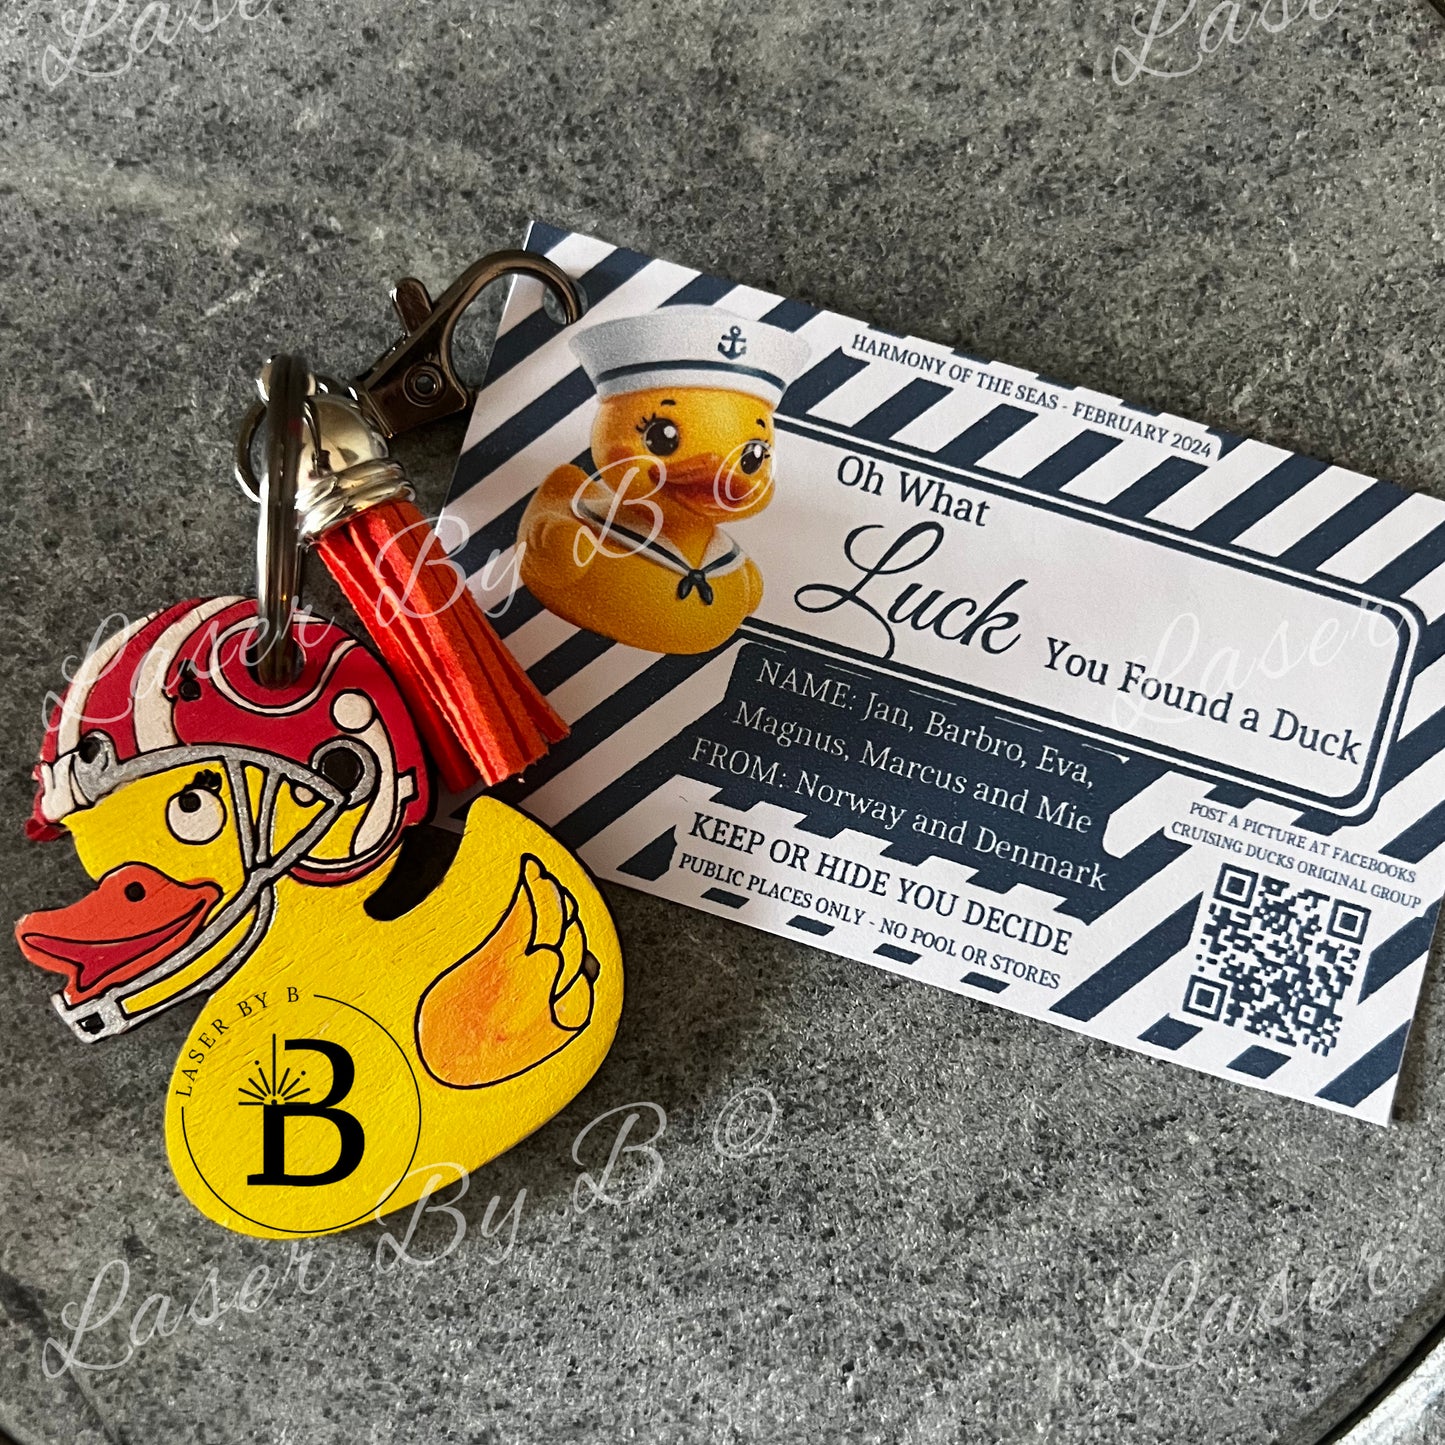 Duck Key Chain Laser File perfect for a Cruising Duck Hunt - Includes Customizable Tag